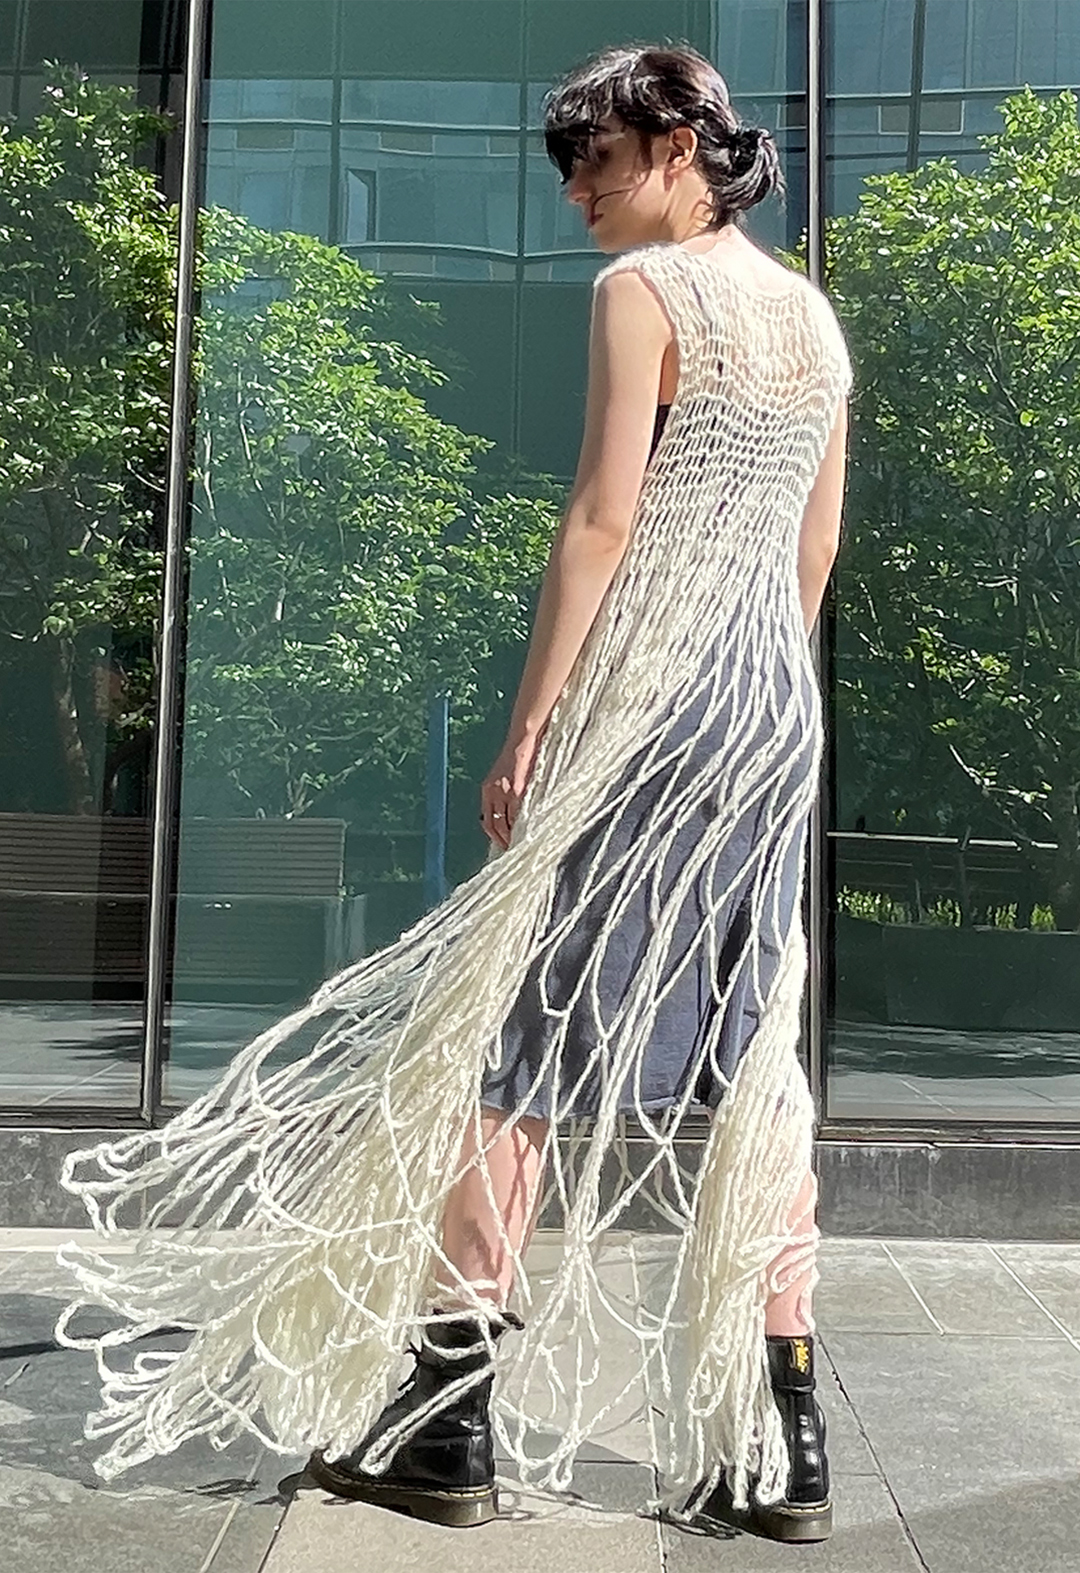 Back view of a model wearing a hand crocheted white lace suri alpaca dress. The model is wearing combat boots and there is a glass building in the background, with reflection of trees.